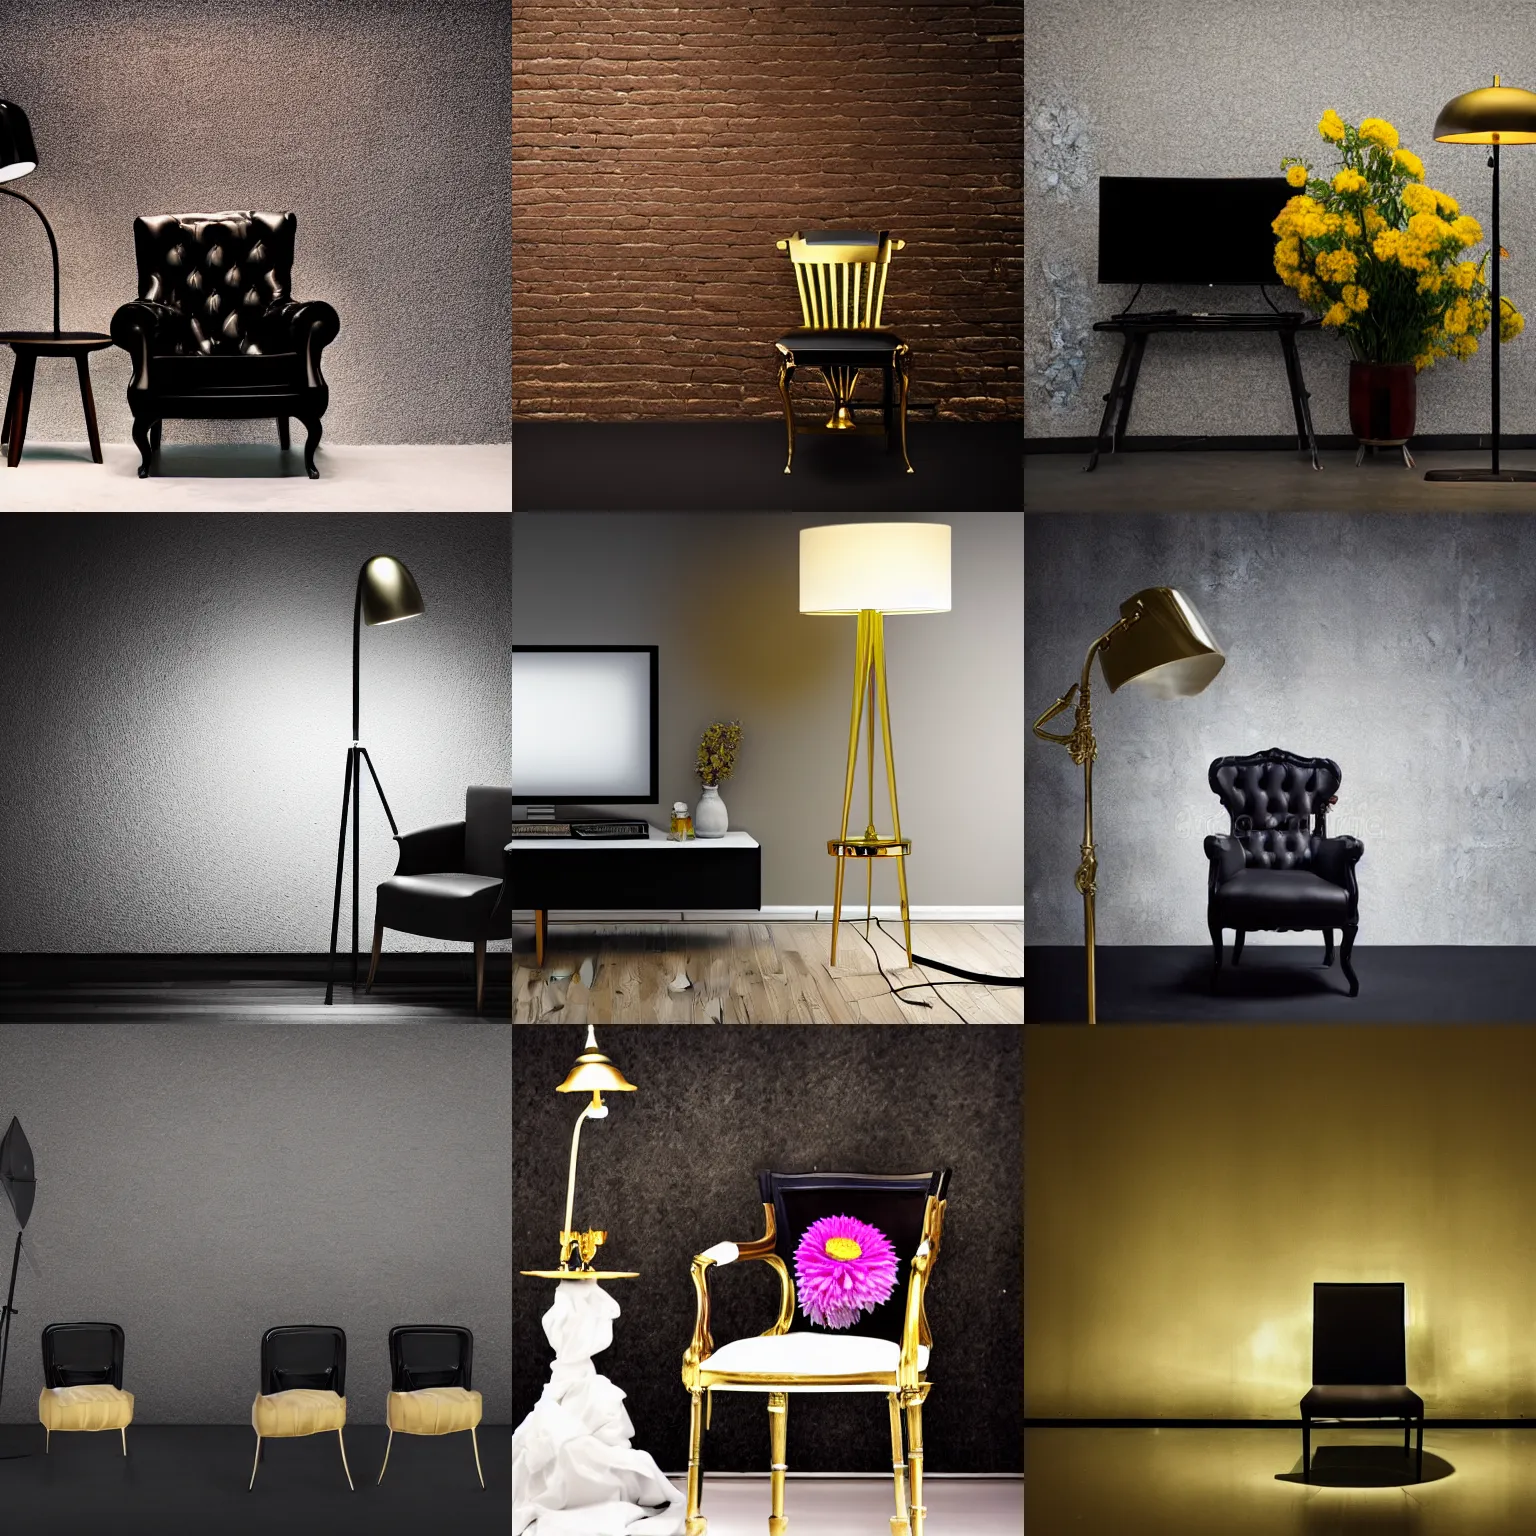 Prompt: detailed photograph, wide angle pitch black studio setting, darkness, high quality, elegance, tv production, pitch black background, single chair brass, standing lamp extravagant, designer, single chair, colorful flower bouquet